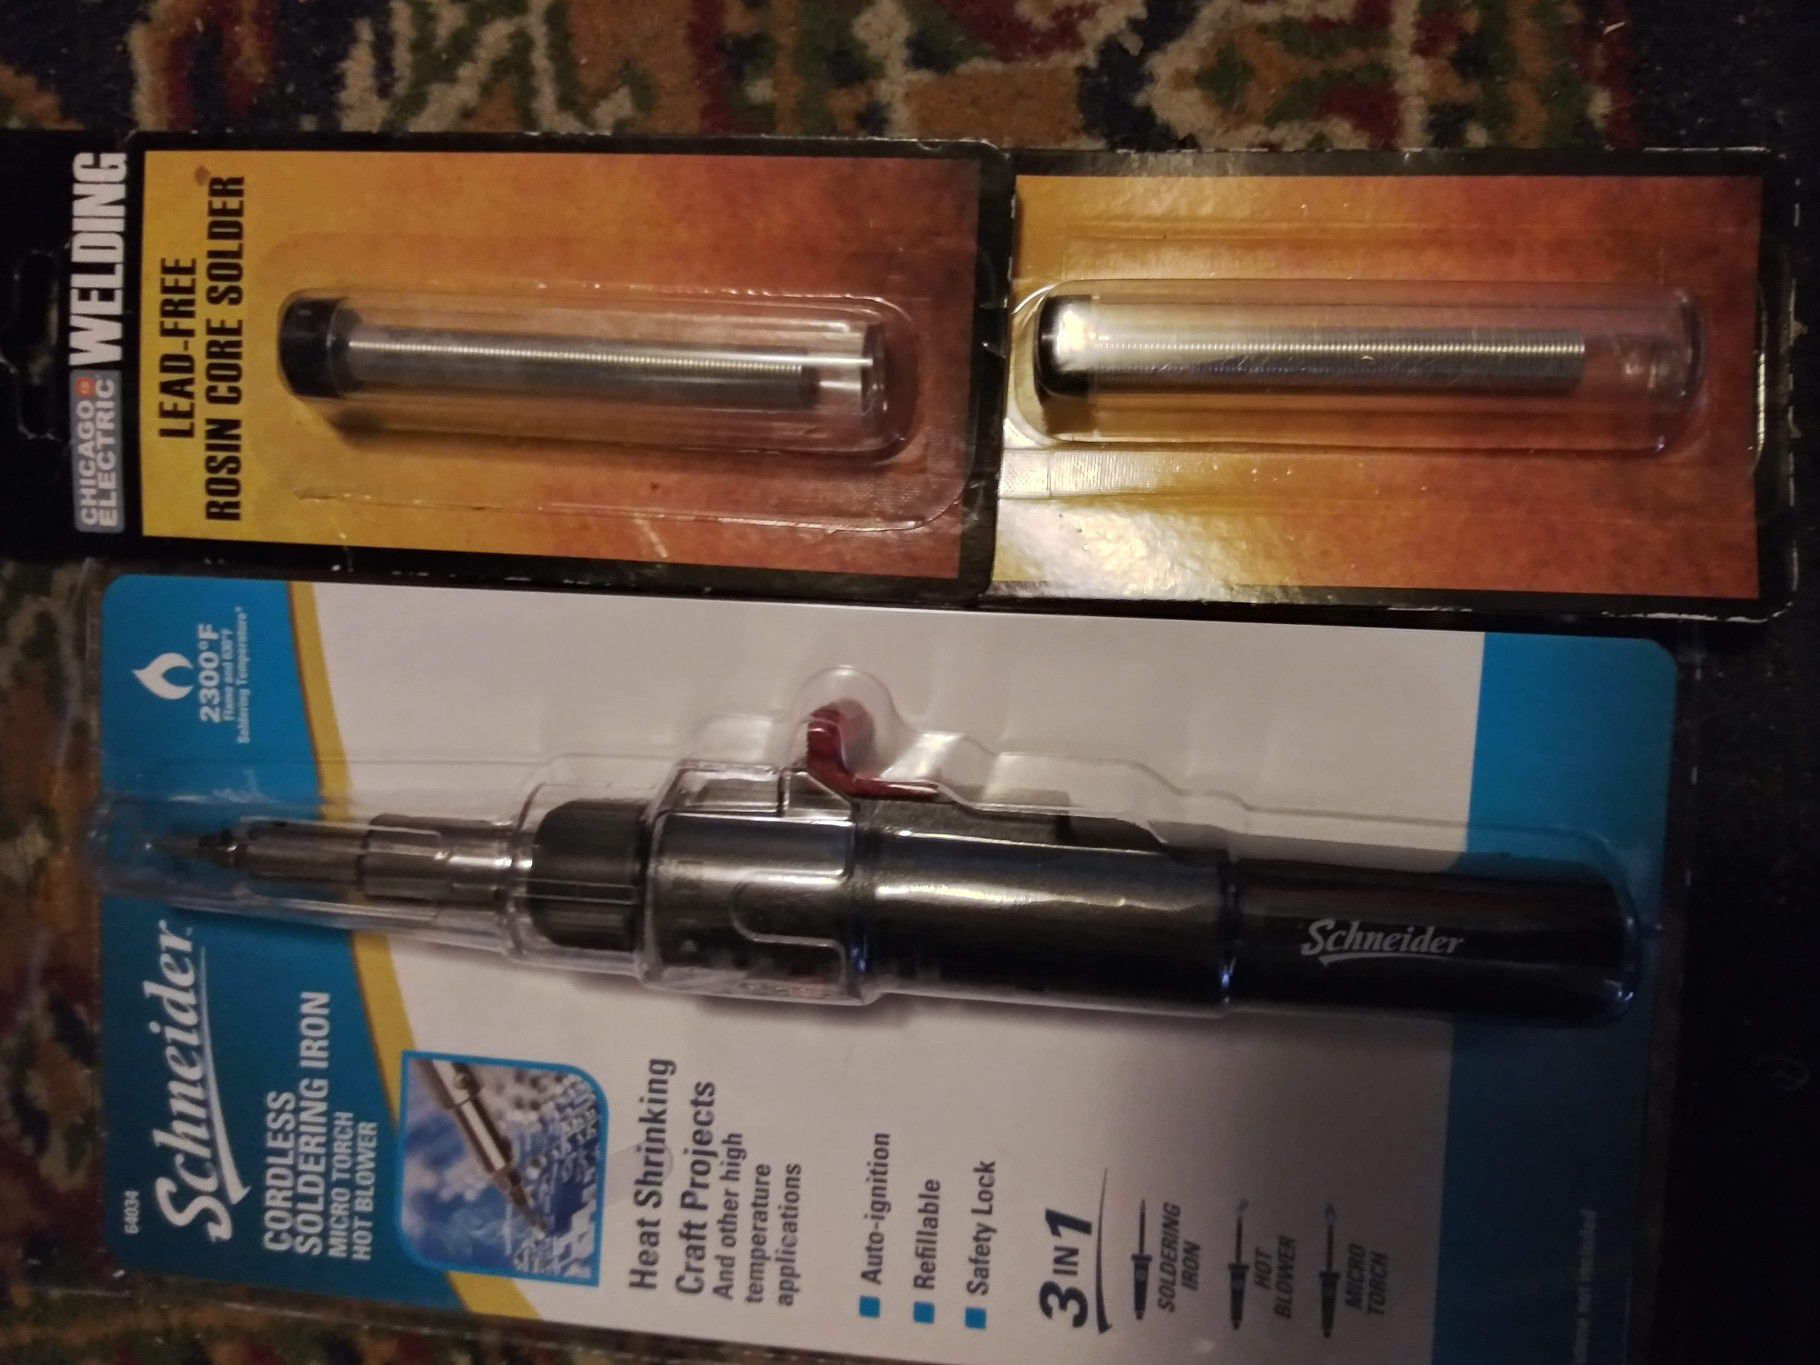 Brand new solidering iron and wire